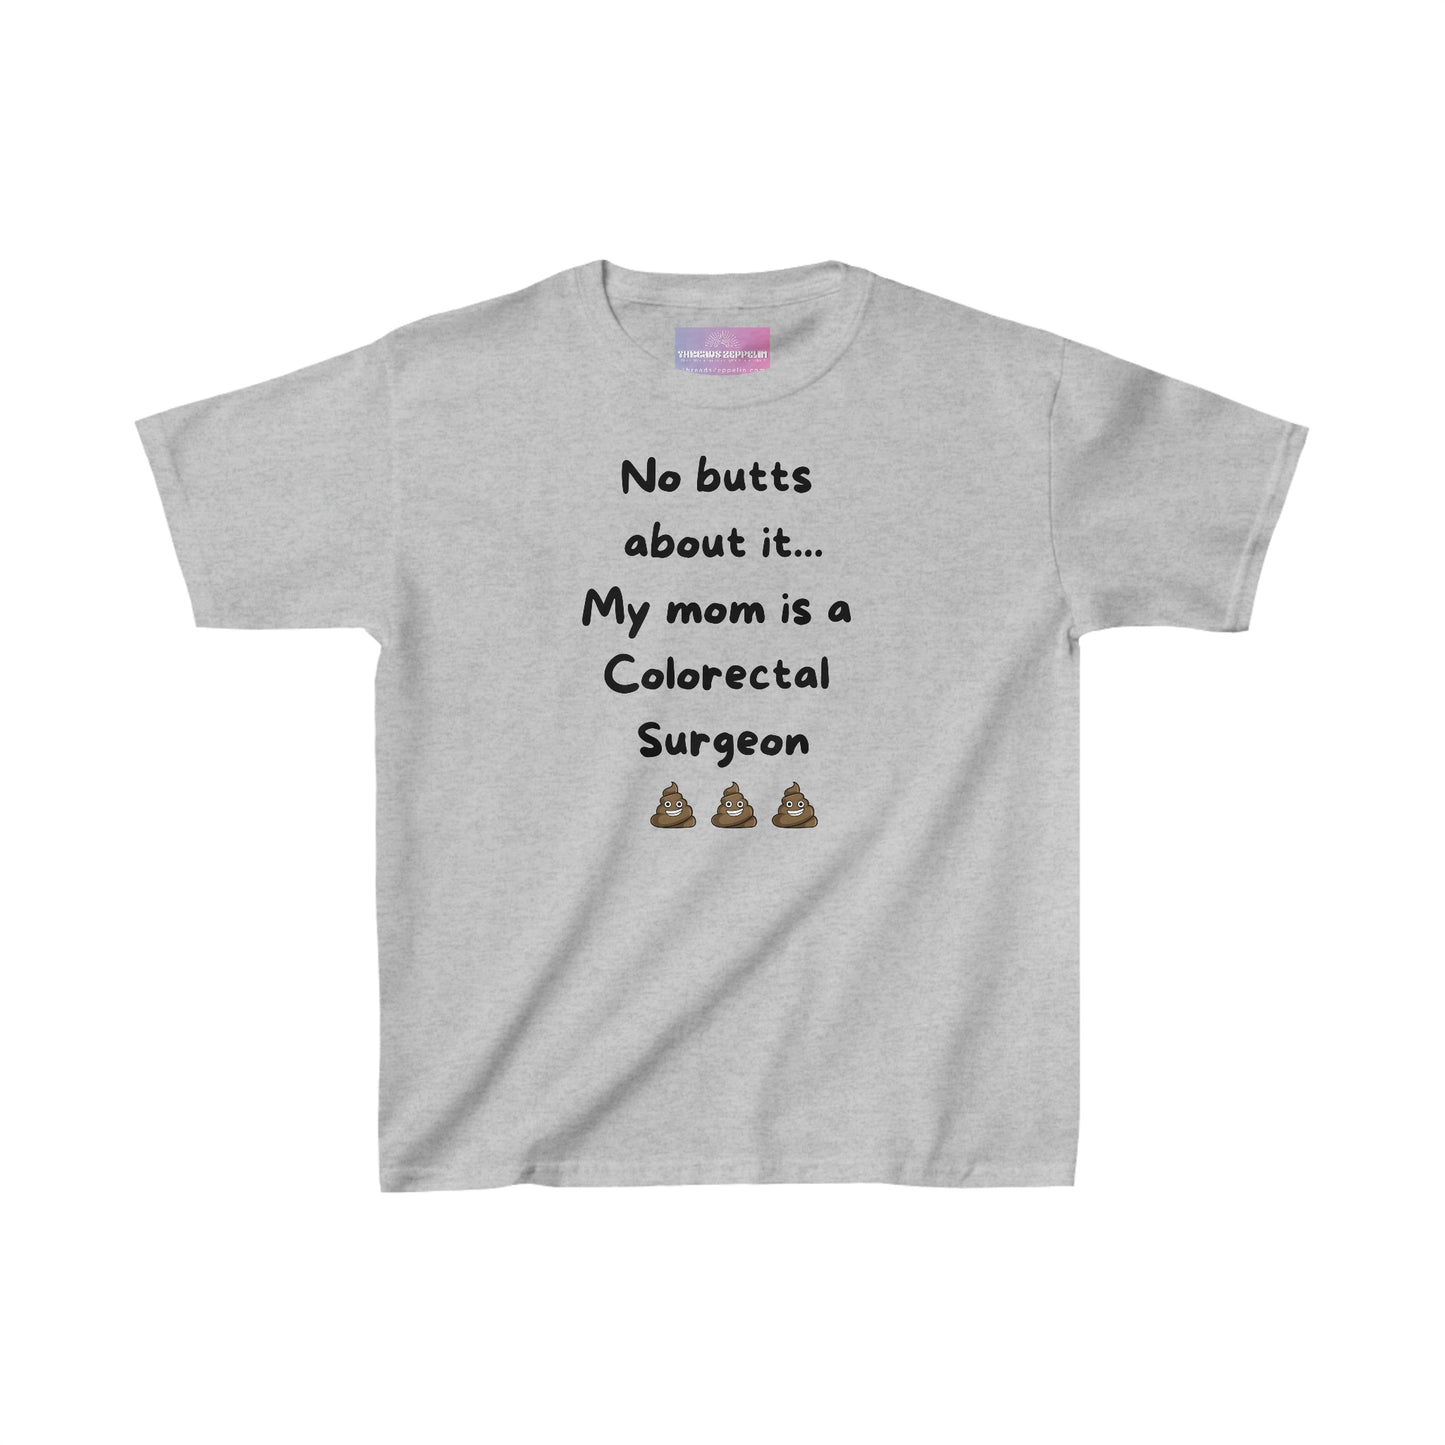 No Butts About it, My Mom is a Colorectal Surgeon, Kids Heavy Cotton Tee